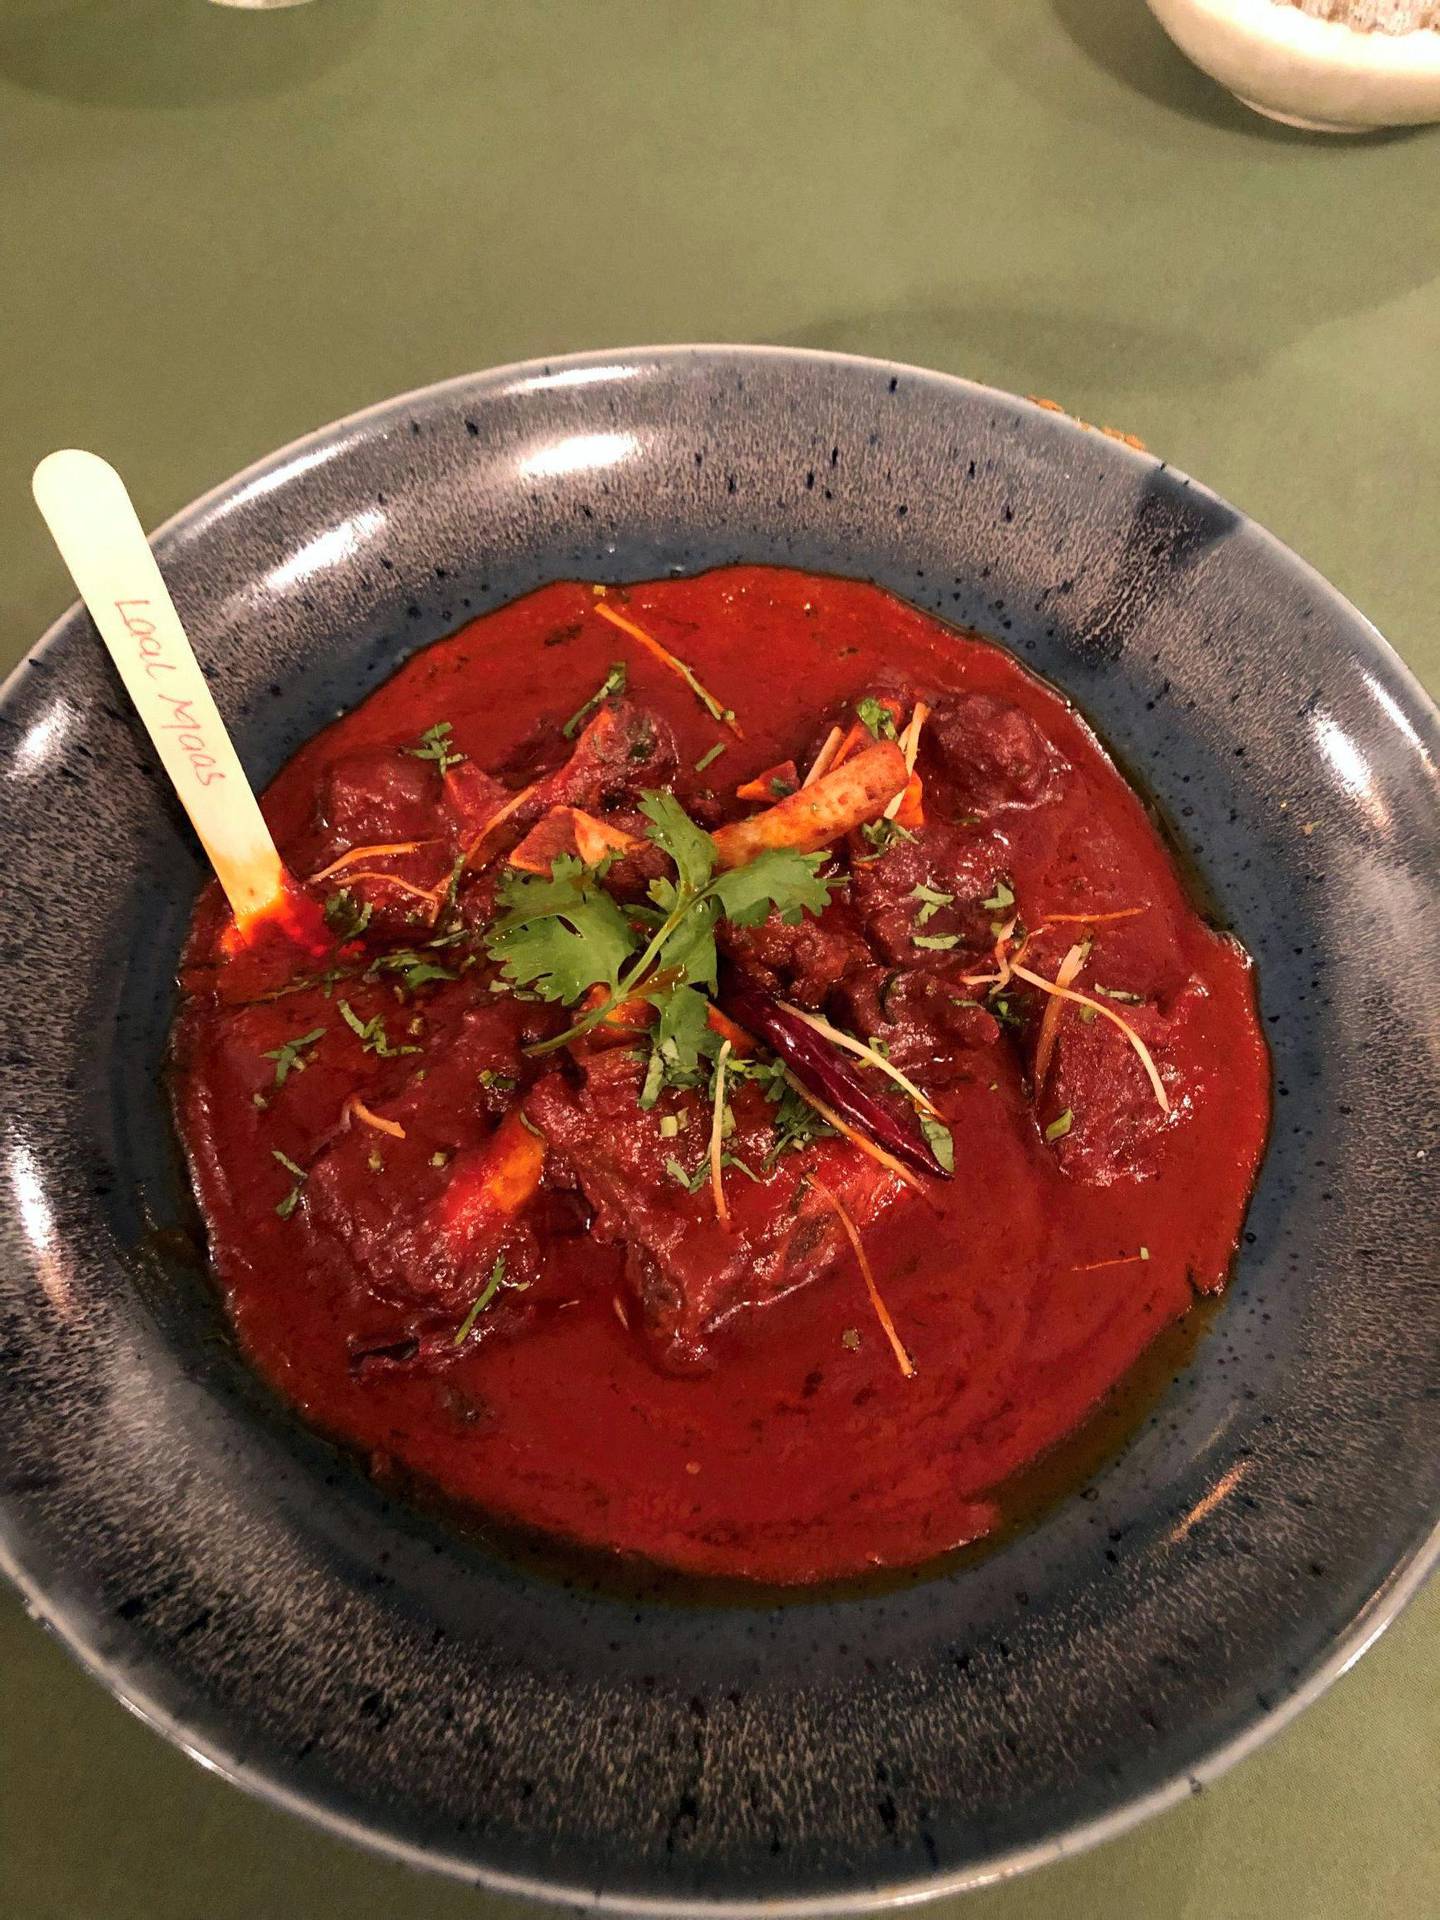 Laal maas is typically made with red chillies, which lends it its fiery colour. Photo: Rakesh Kumar 